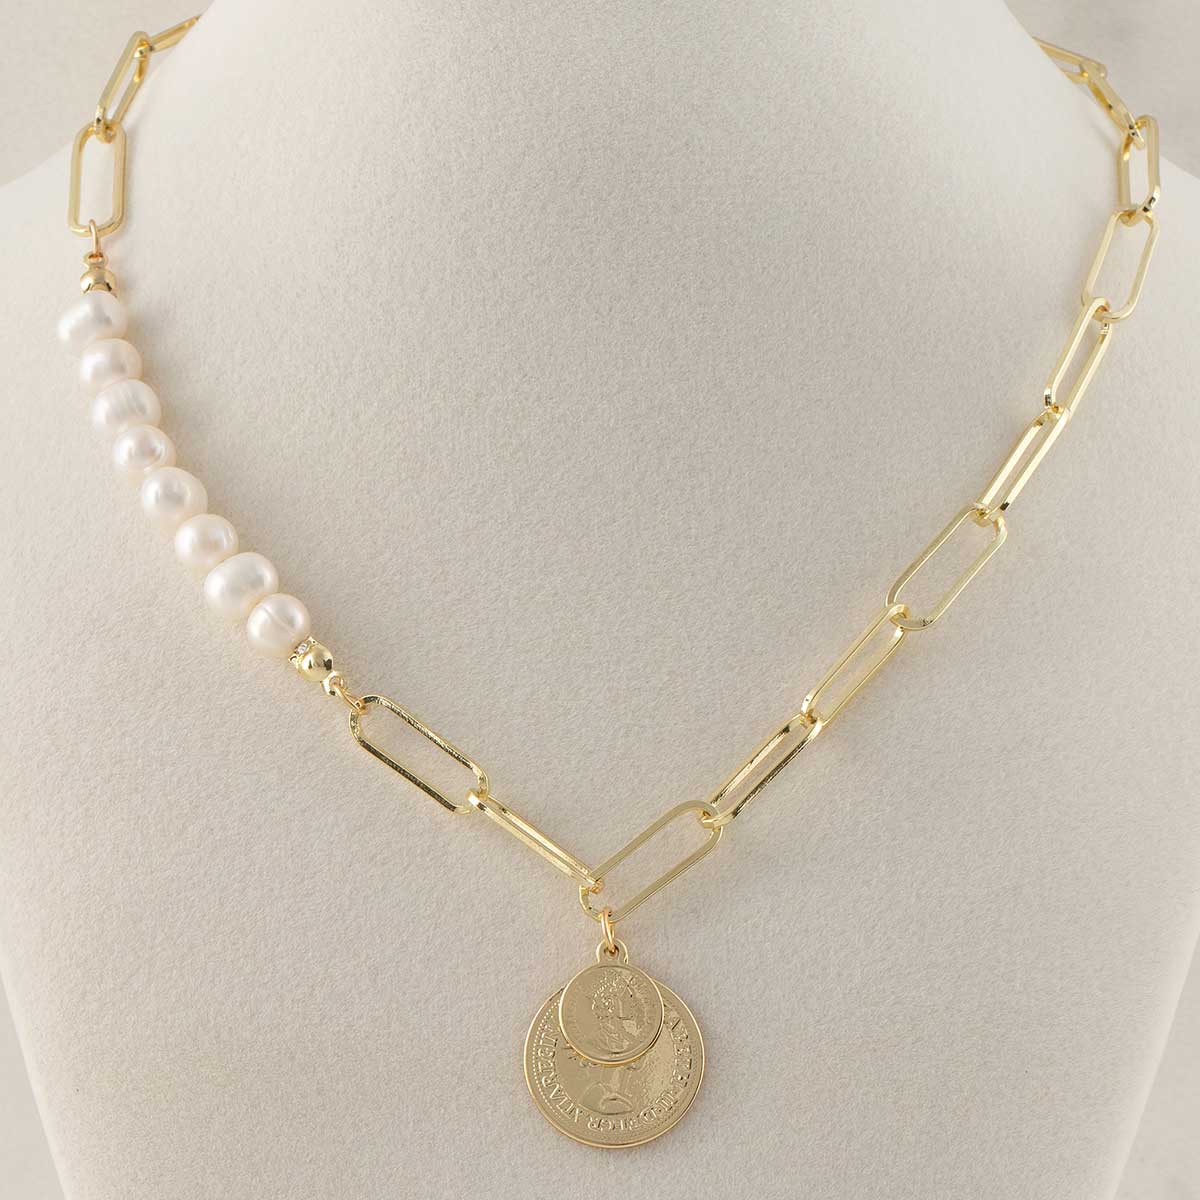 NECKLACE PEARLS LINKS CIRCLE